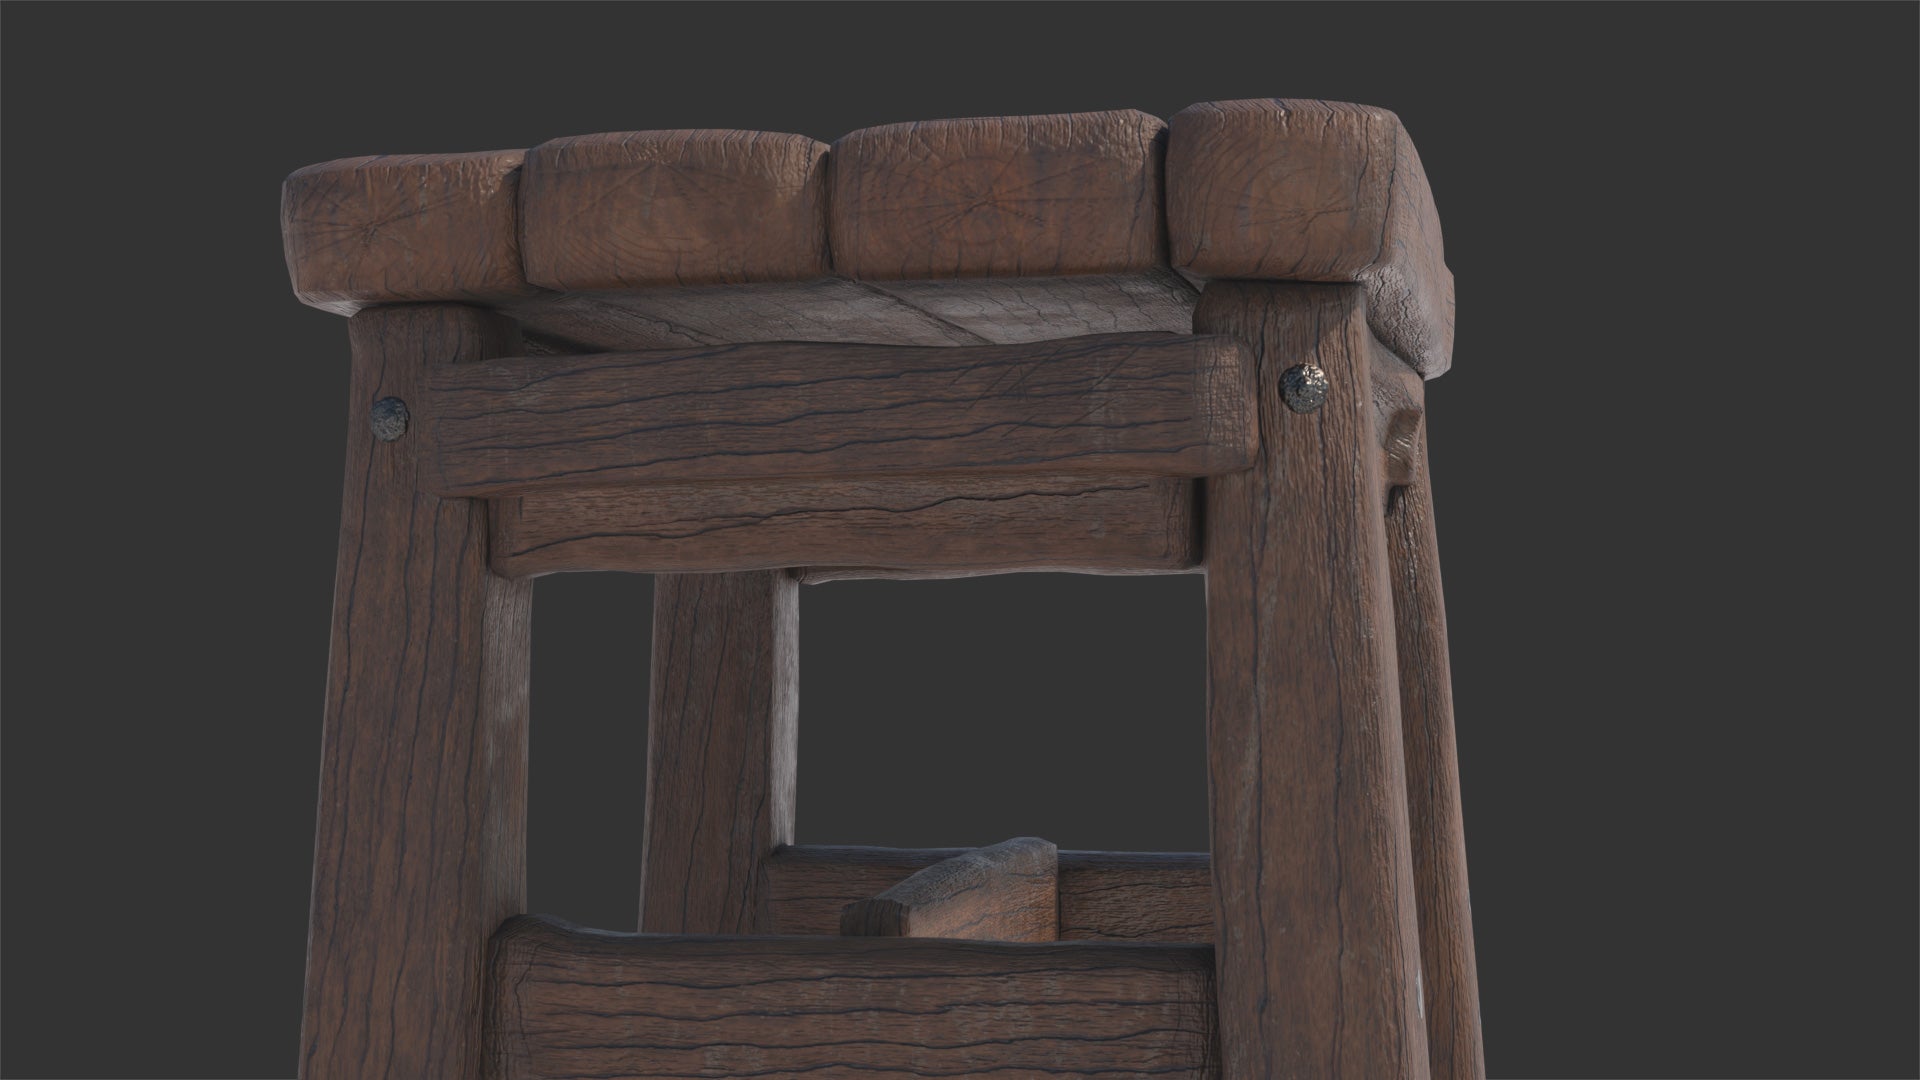 3D model of a rustic wooden stool, focused on a detail of the legs attachments with old iron nails, looks handmade and it would fit well in a medieval setting. It had low polycount and still looks very realistic!